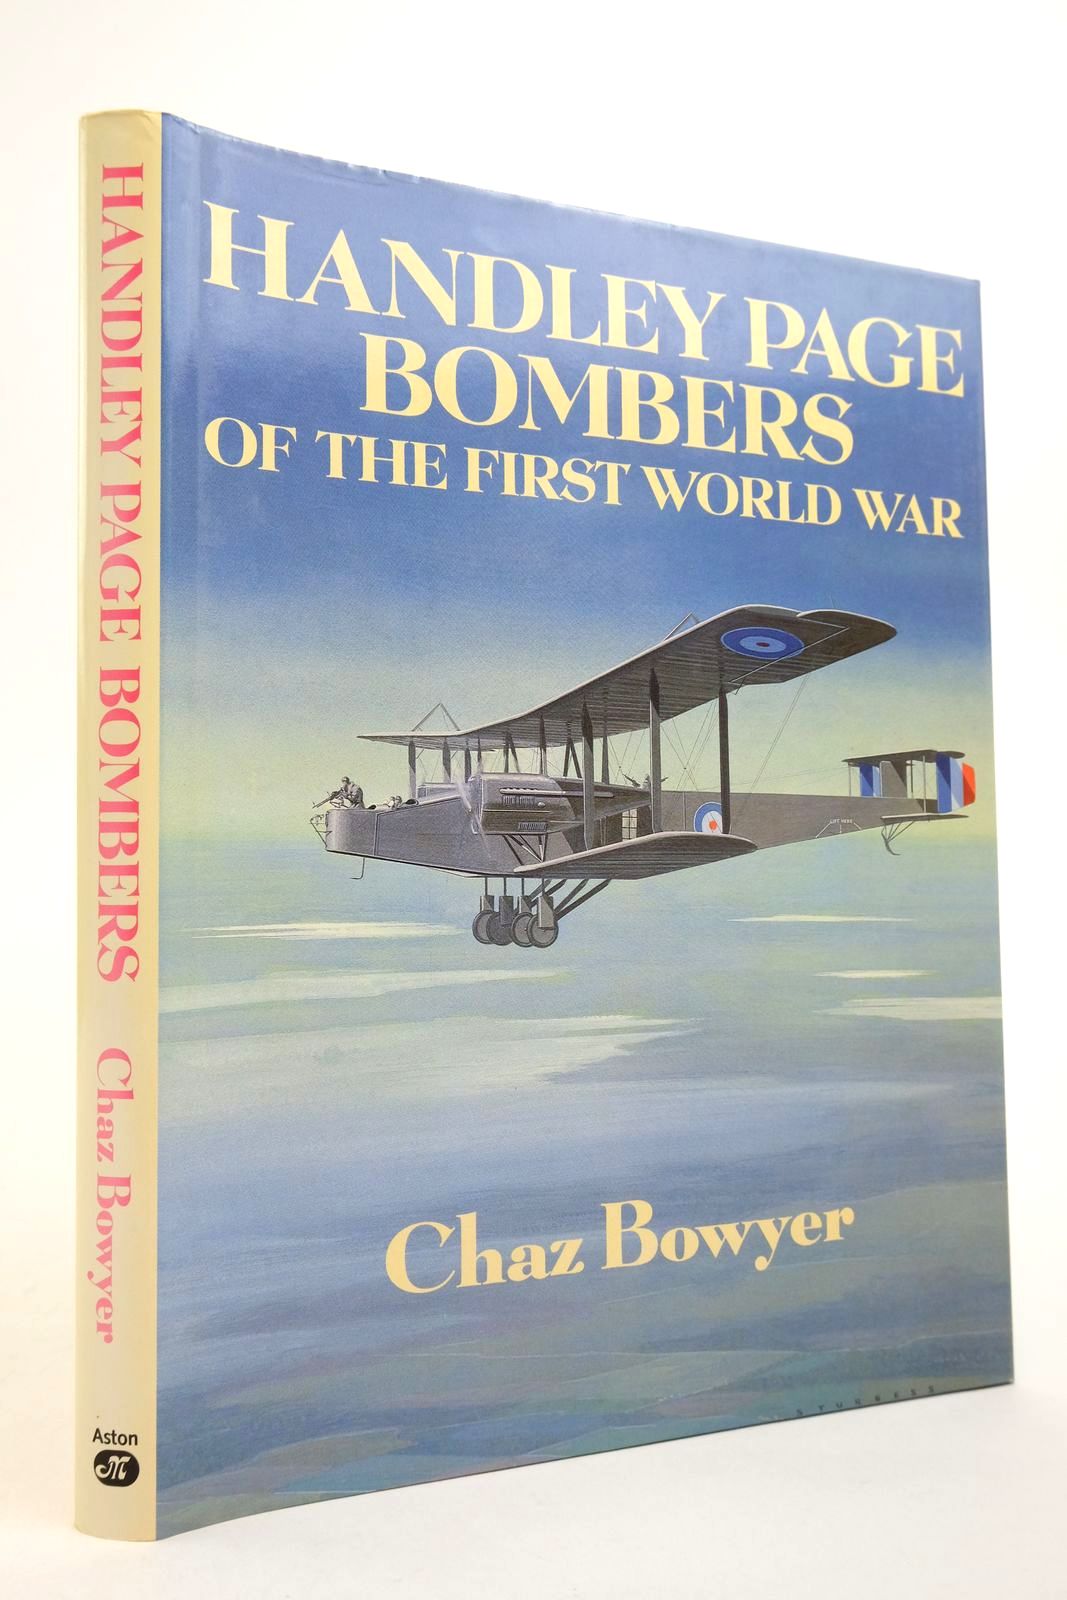 Photo of HANDLEY PAGE BOMBERS OF THE FIRST WORLD WAR written by Bowyer, Chaz published by Aston Publications (STOCK CODE: 2139893)  for sale by Stella & Rose's Books